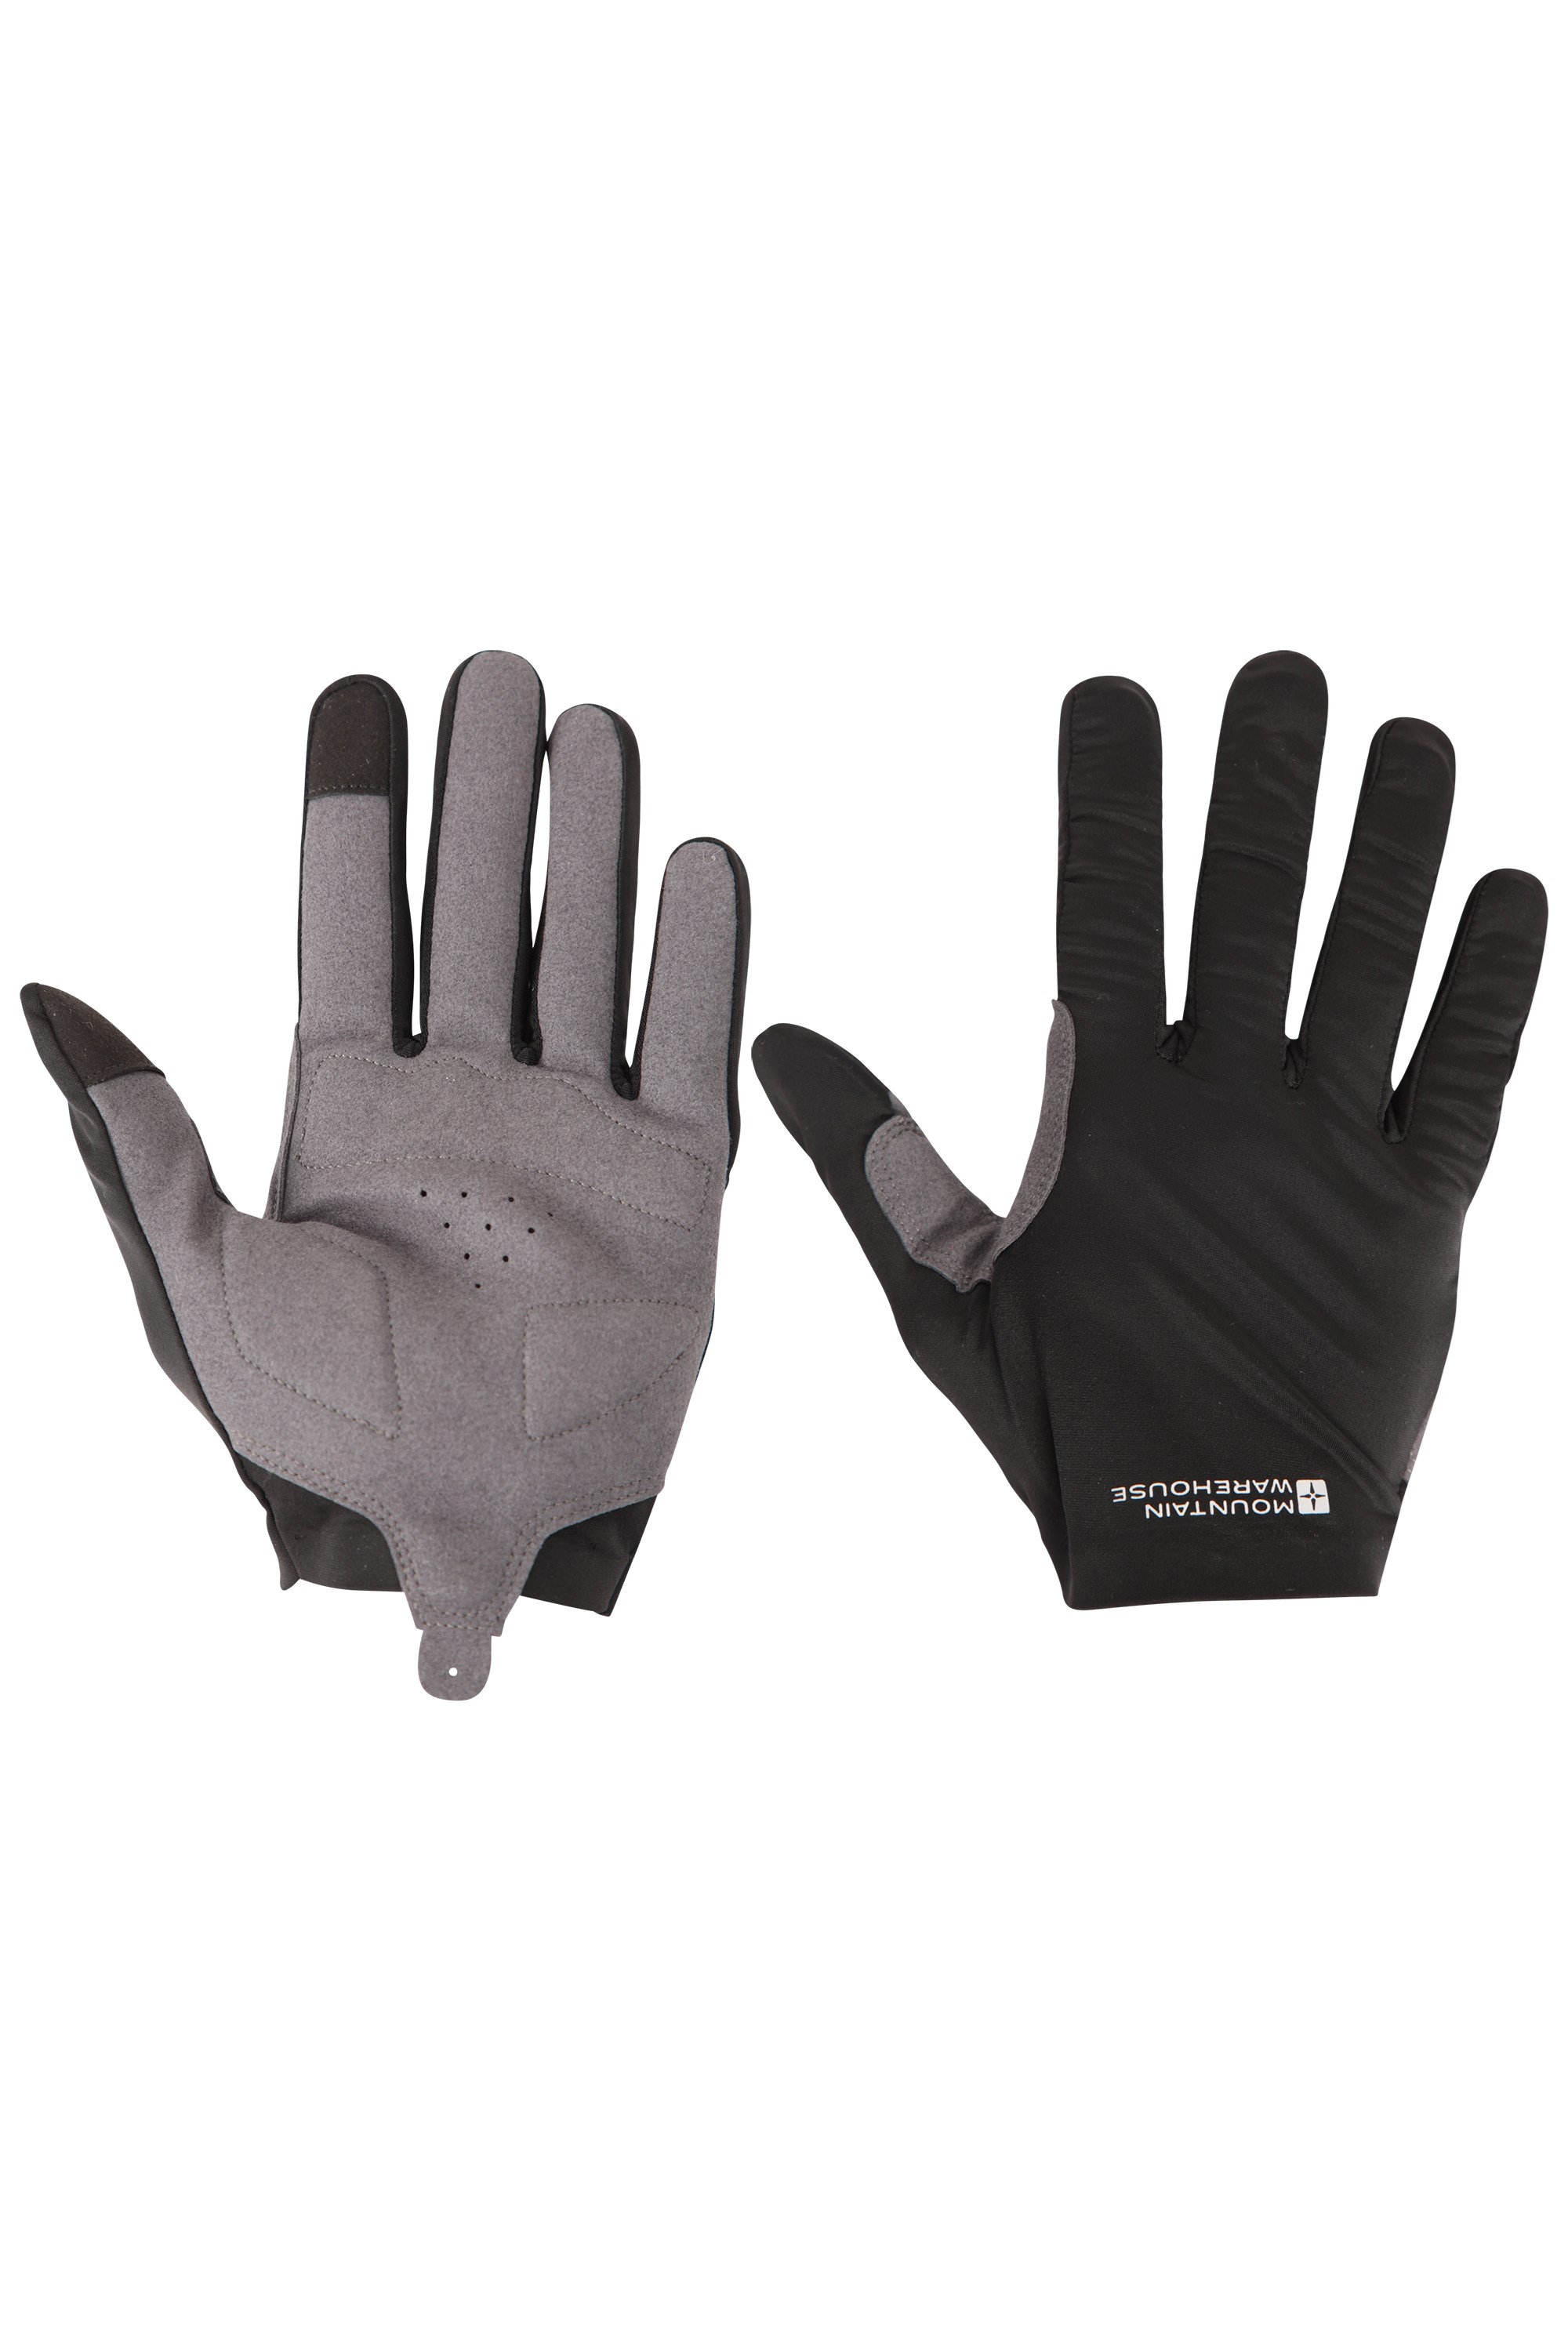 Mountain Warehouse Mens Windproof Gloves Breathable & Flexible with Showerproof 